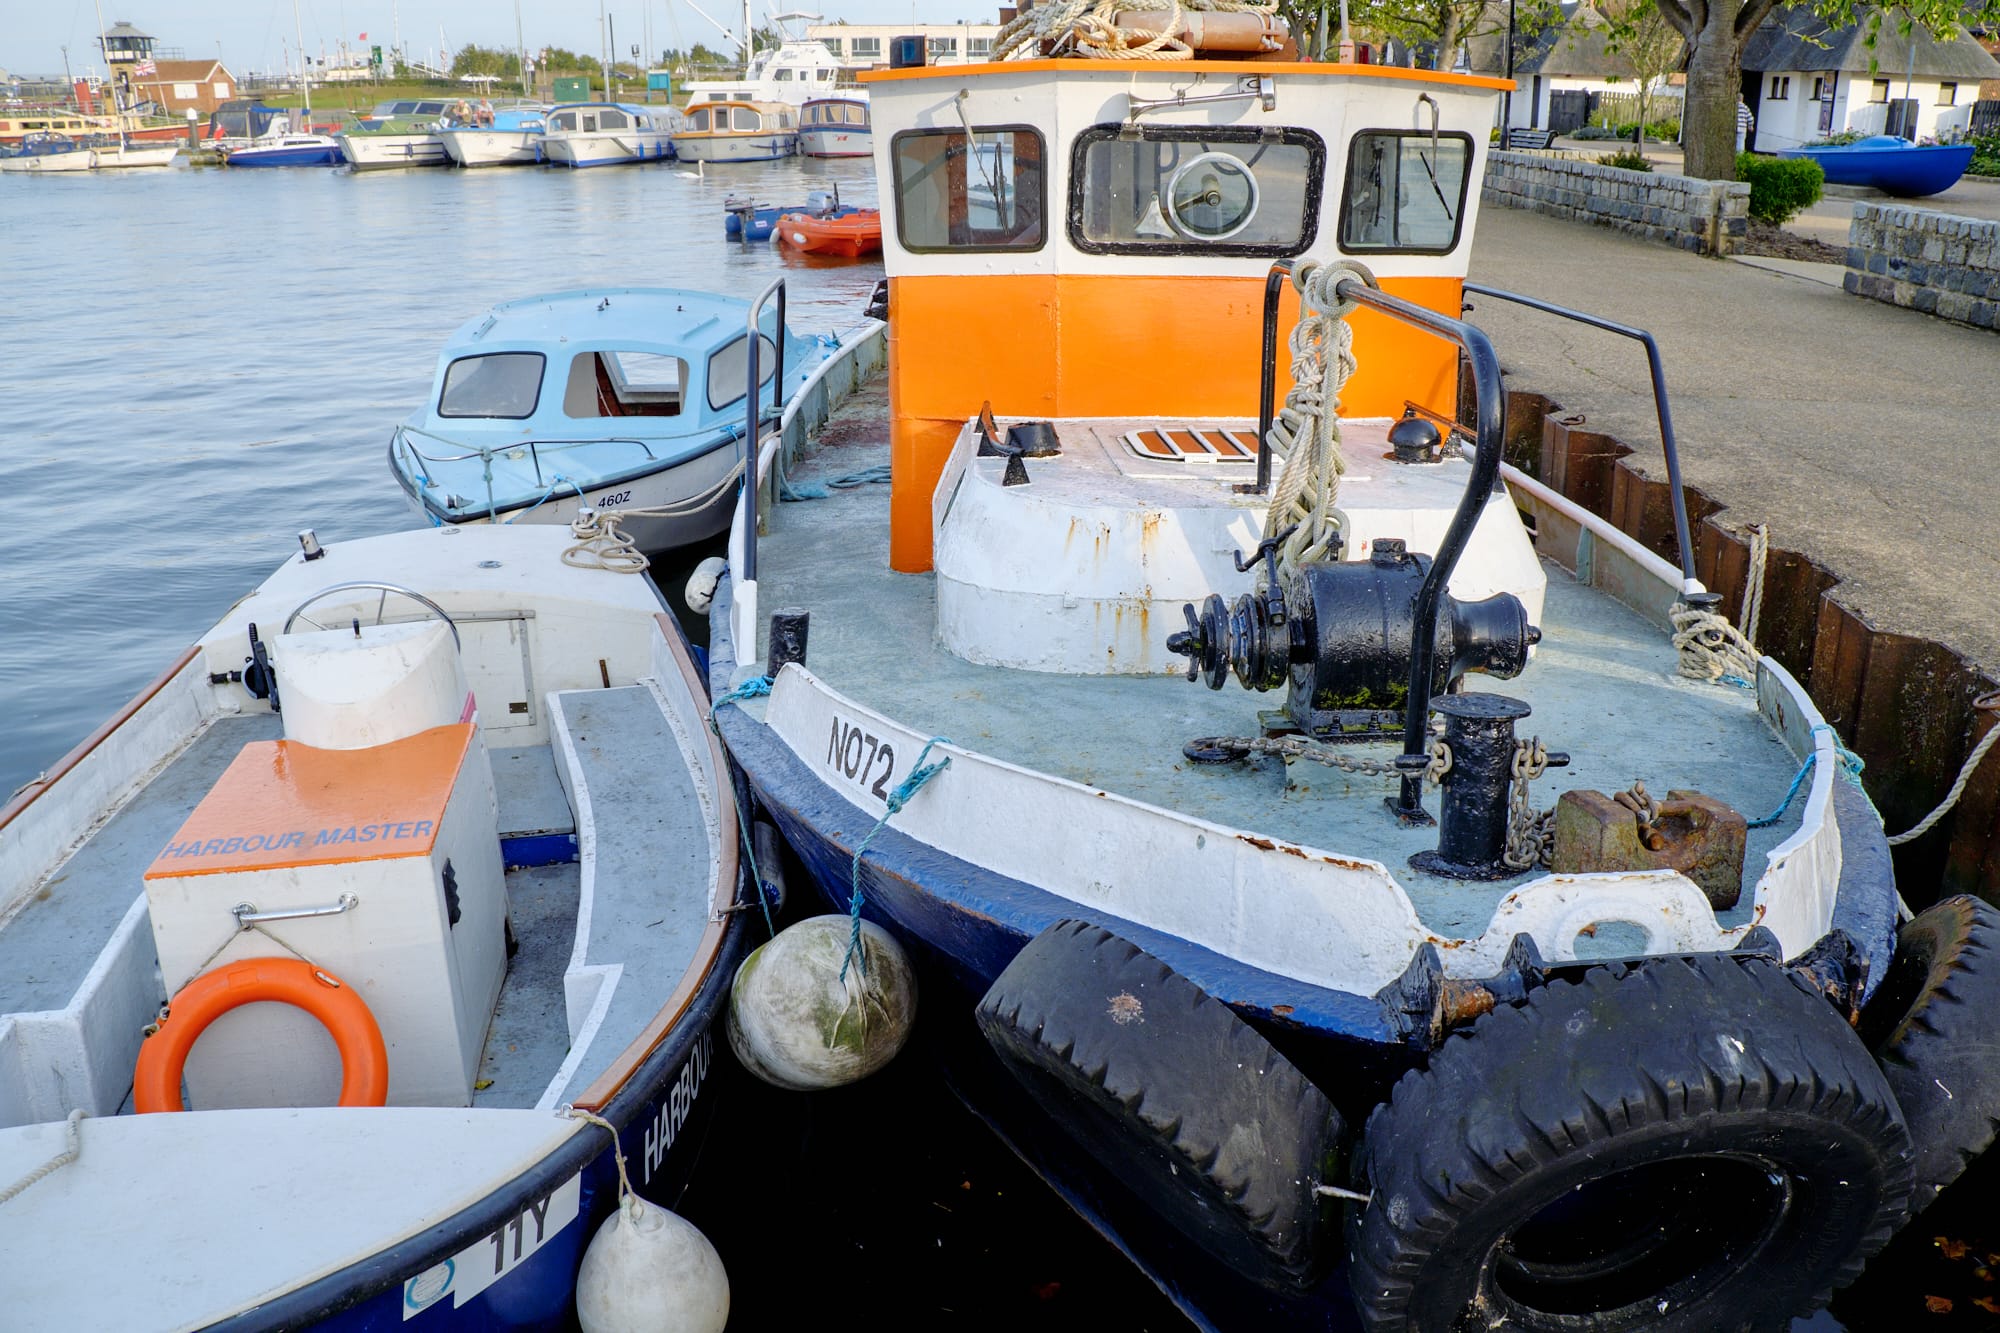 harbour master boats